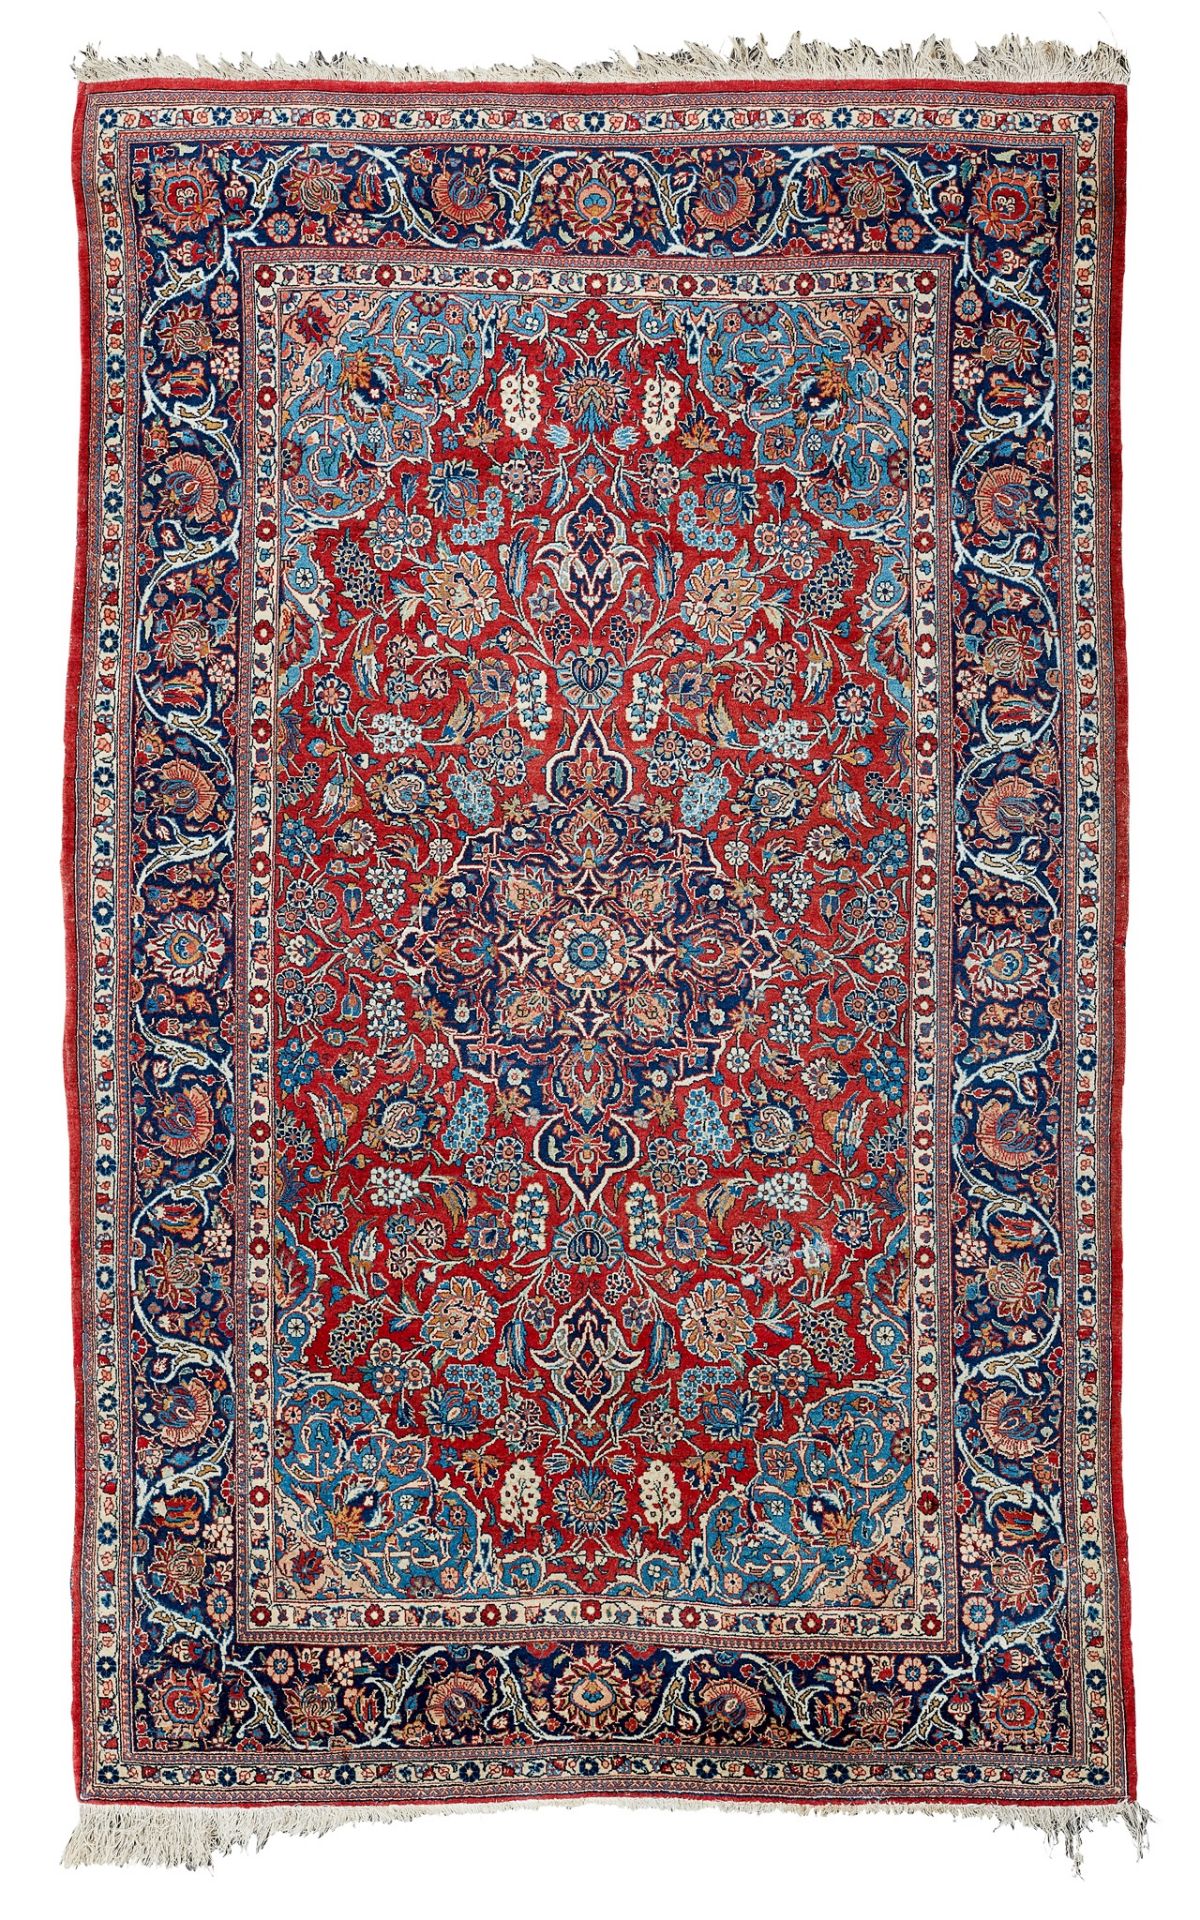 KASHAN RUG CENTRAL PERSIA, LATE 19TH/EARLY 20TH CENTURY